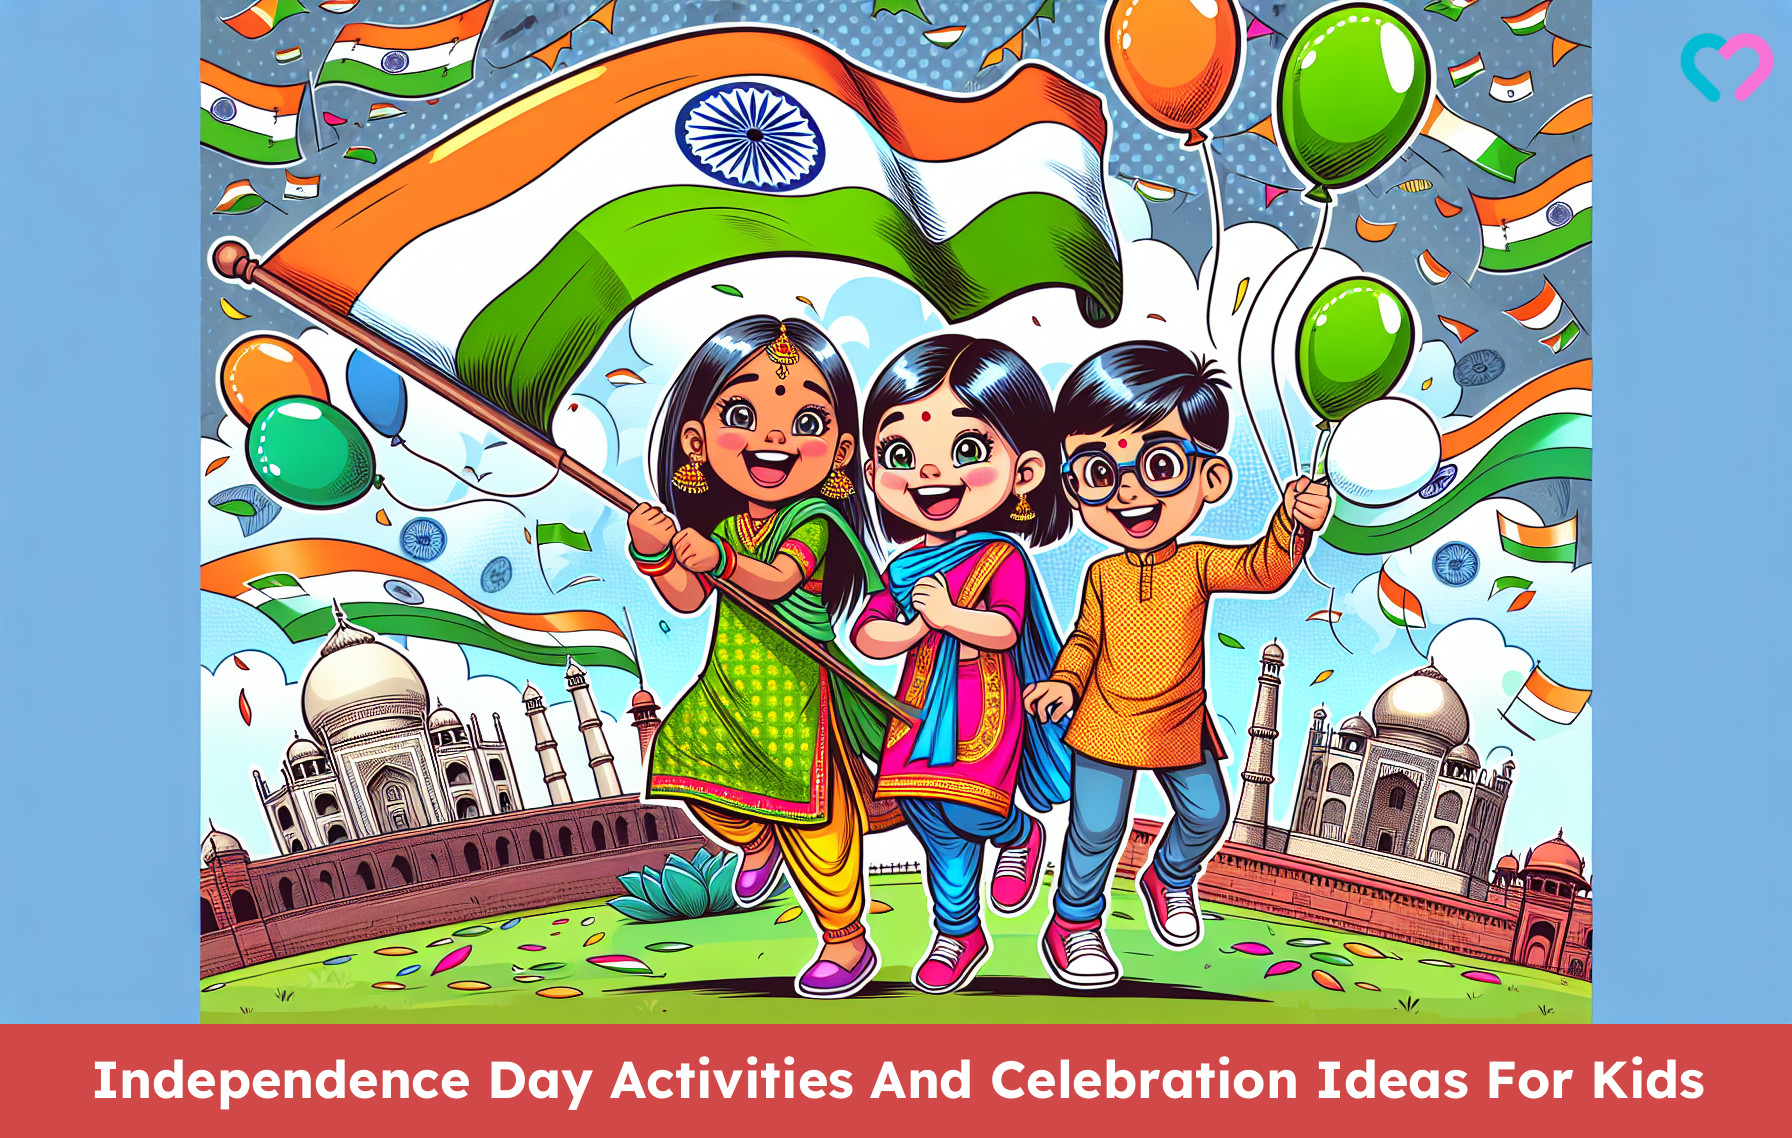 Independence Day Activities For Kids_illustration